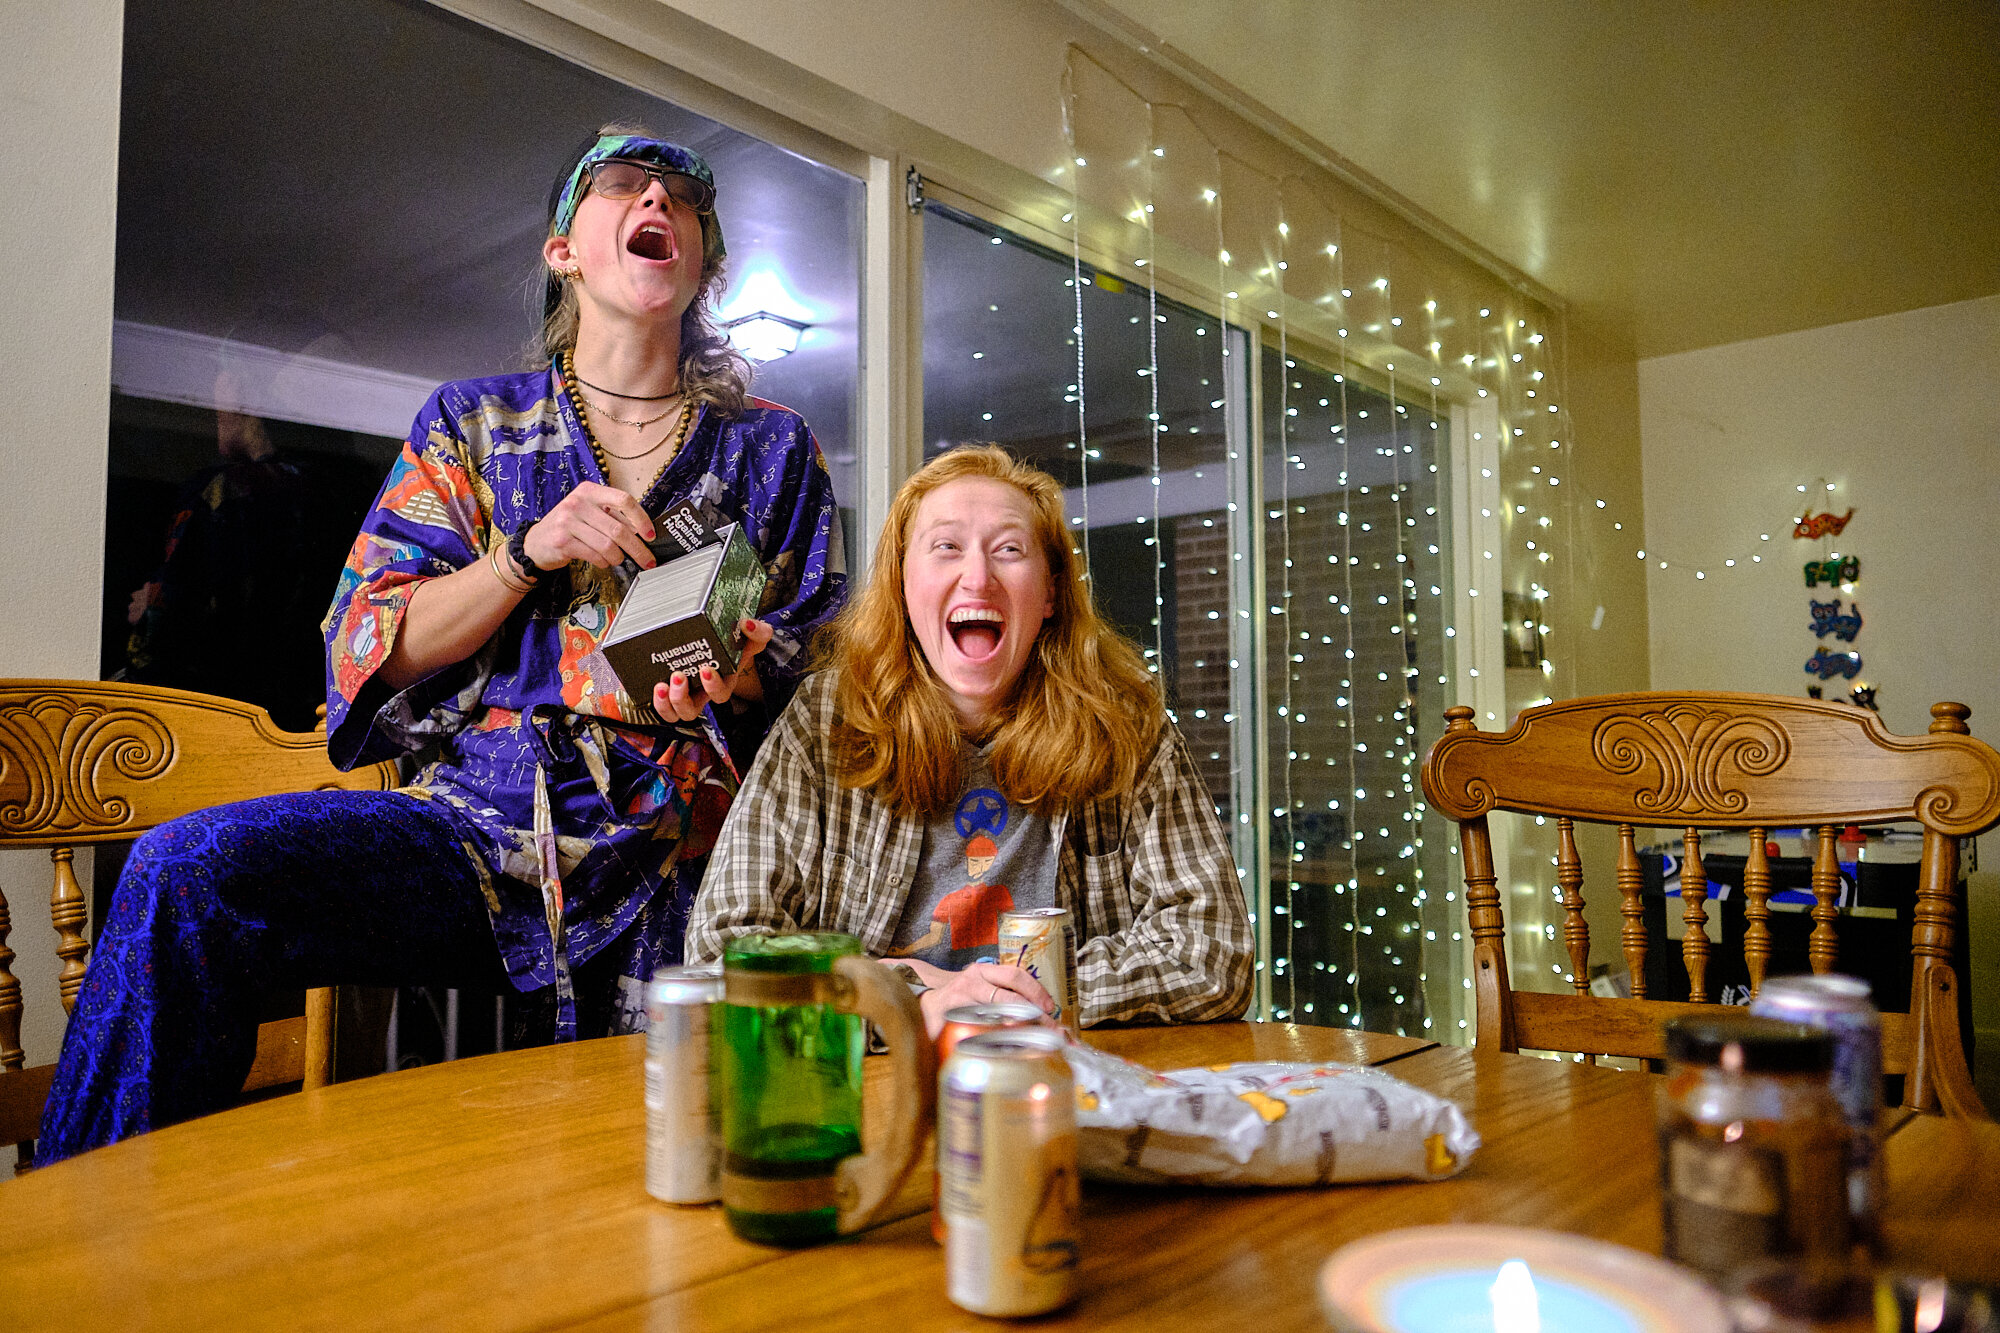  Two of our roommates, Julie and Heidi amused by a Cards Against Humanity answer. | Holladay, UT 1/8/20 